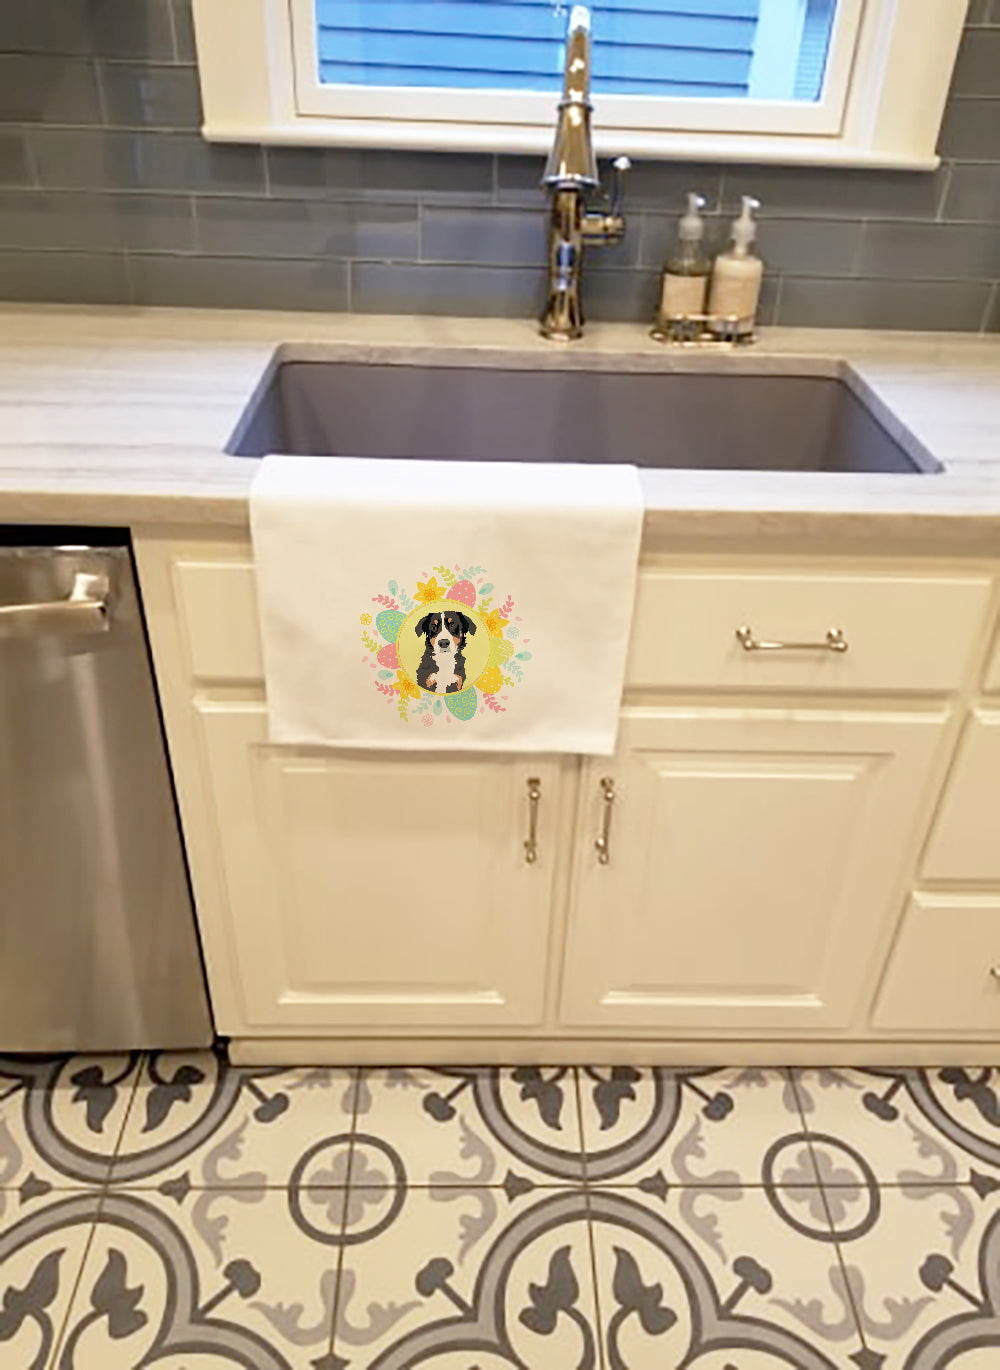 Buy this Bernese Mountain Dog Puppy #2 Easter White Kitchen Towel Set of 2